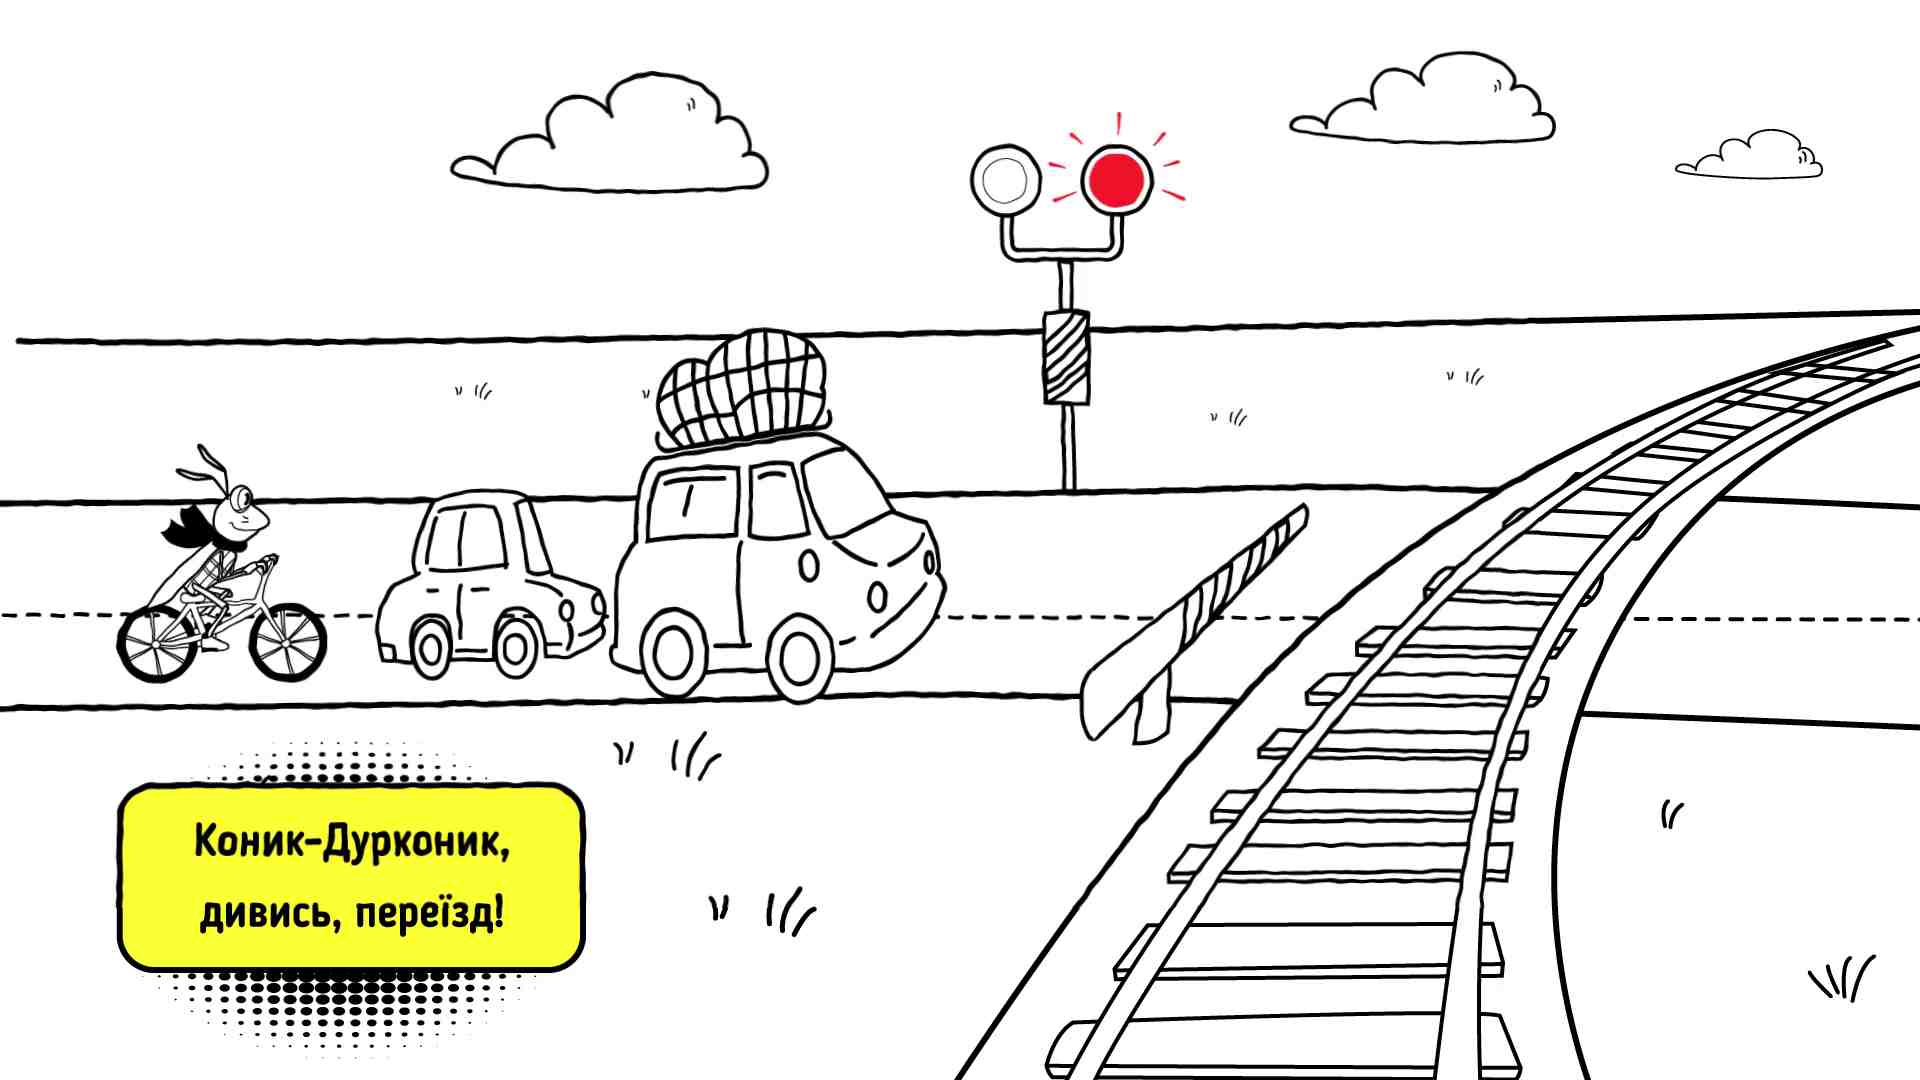 Railroad crossing - 2D Animated Video